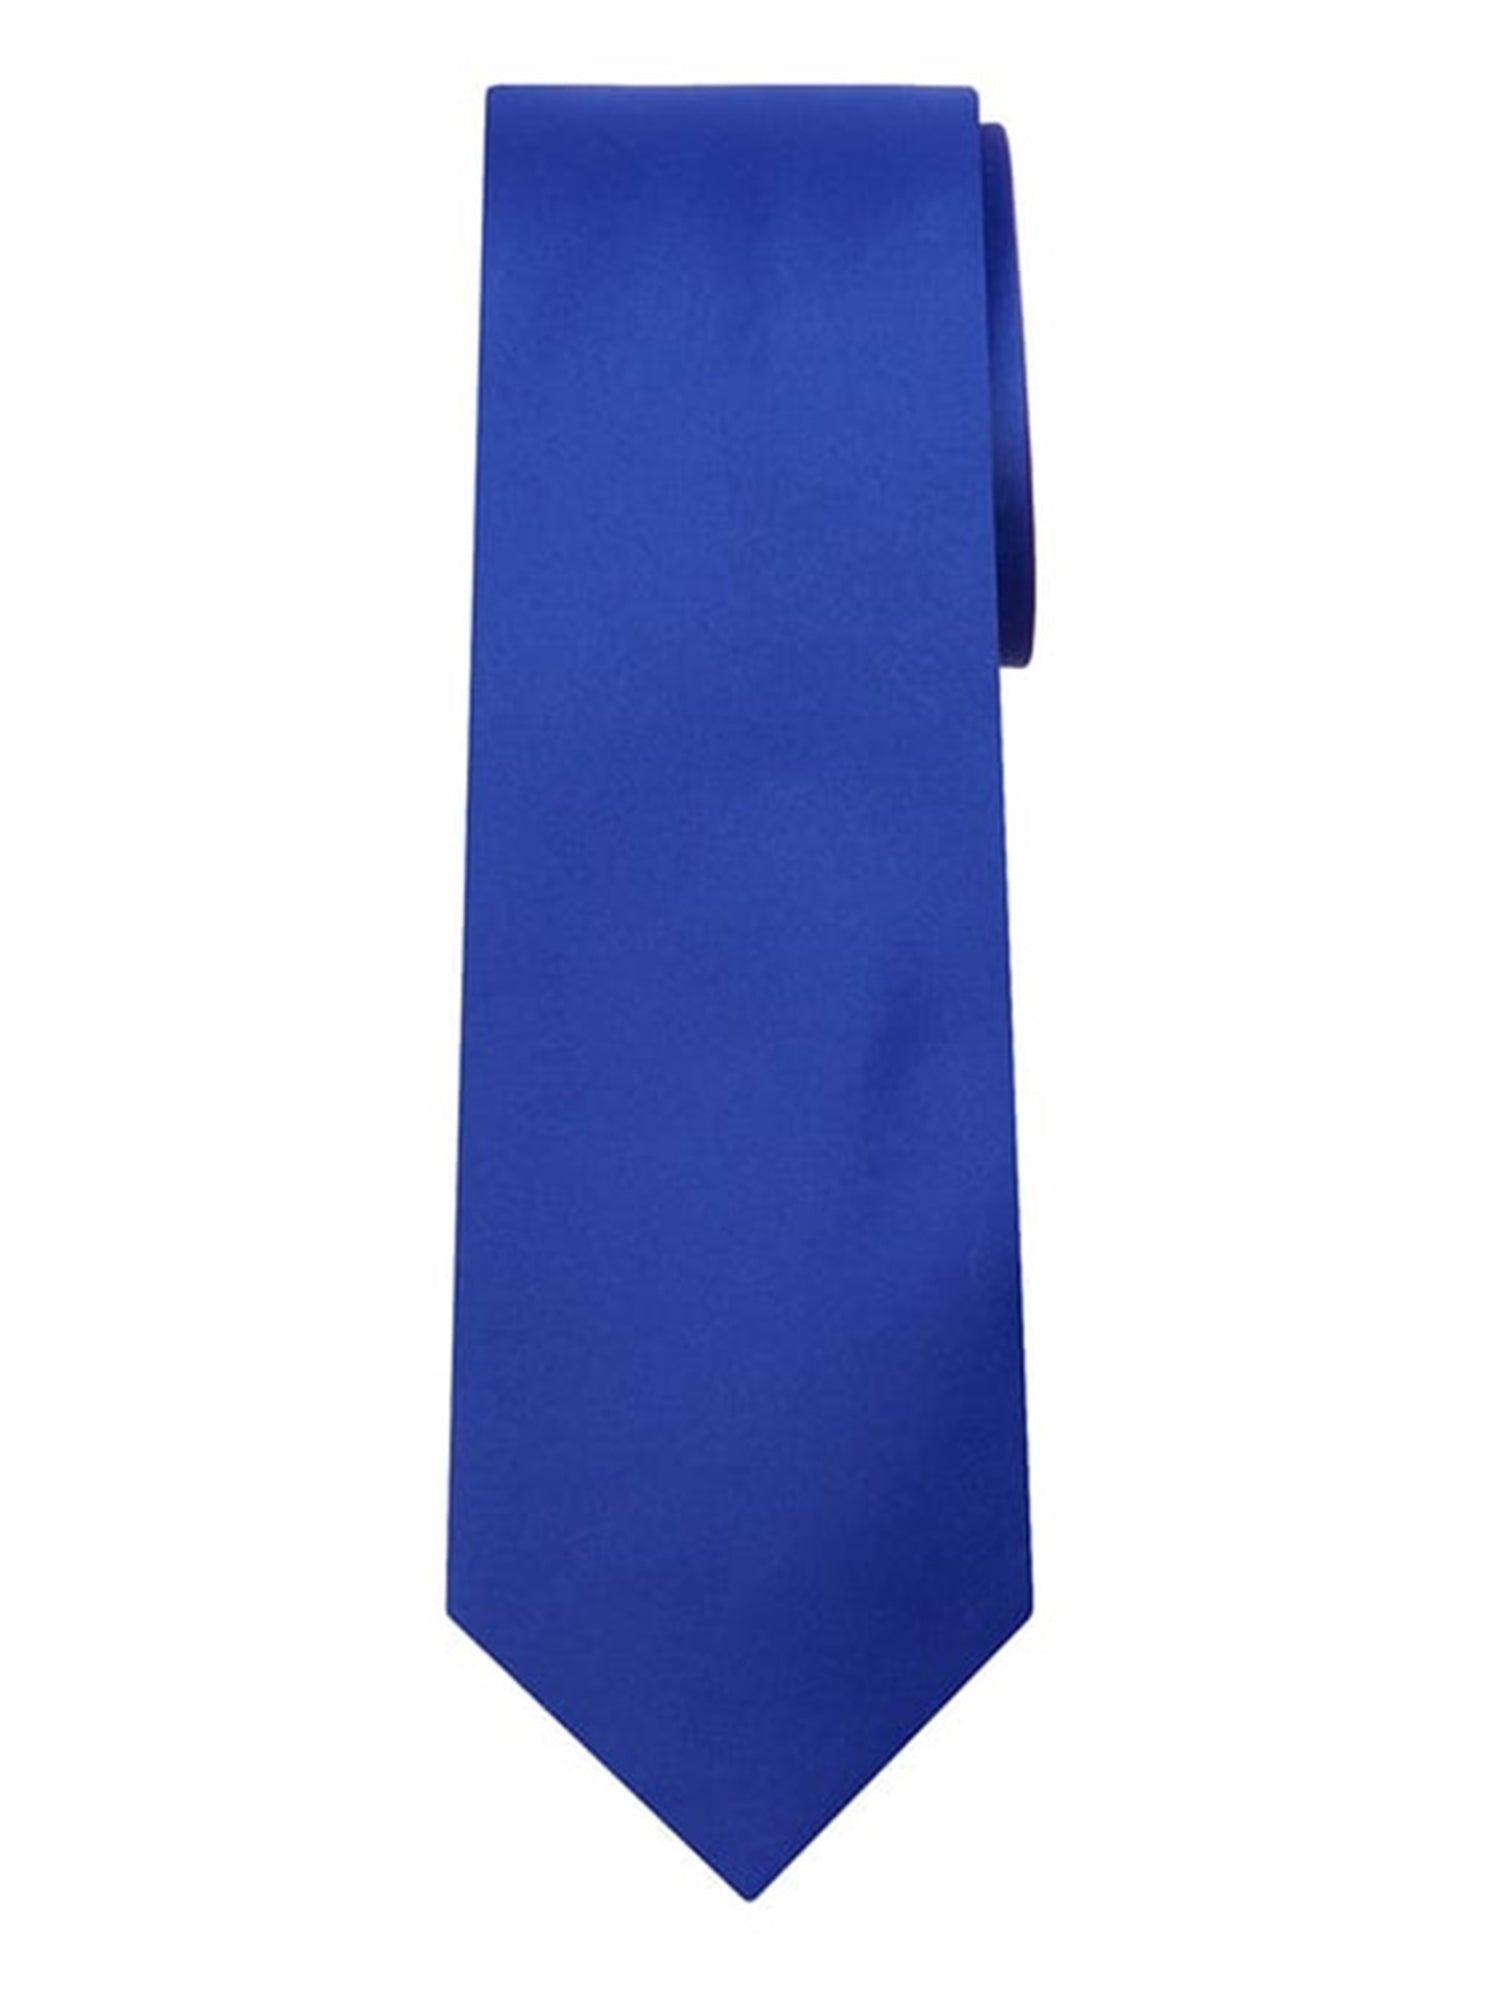 Marquis Men's Solid Neck Tie & Hanky Set Neck Ties Marquis Royal Blue One Size 